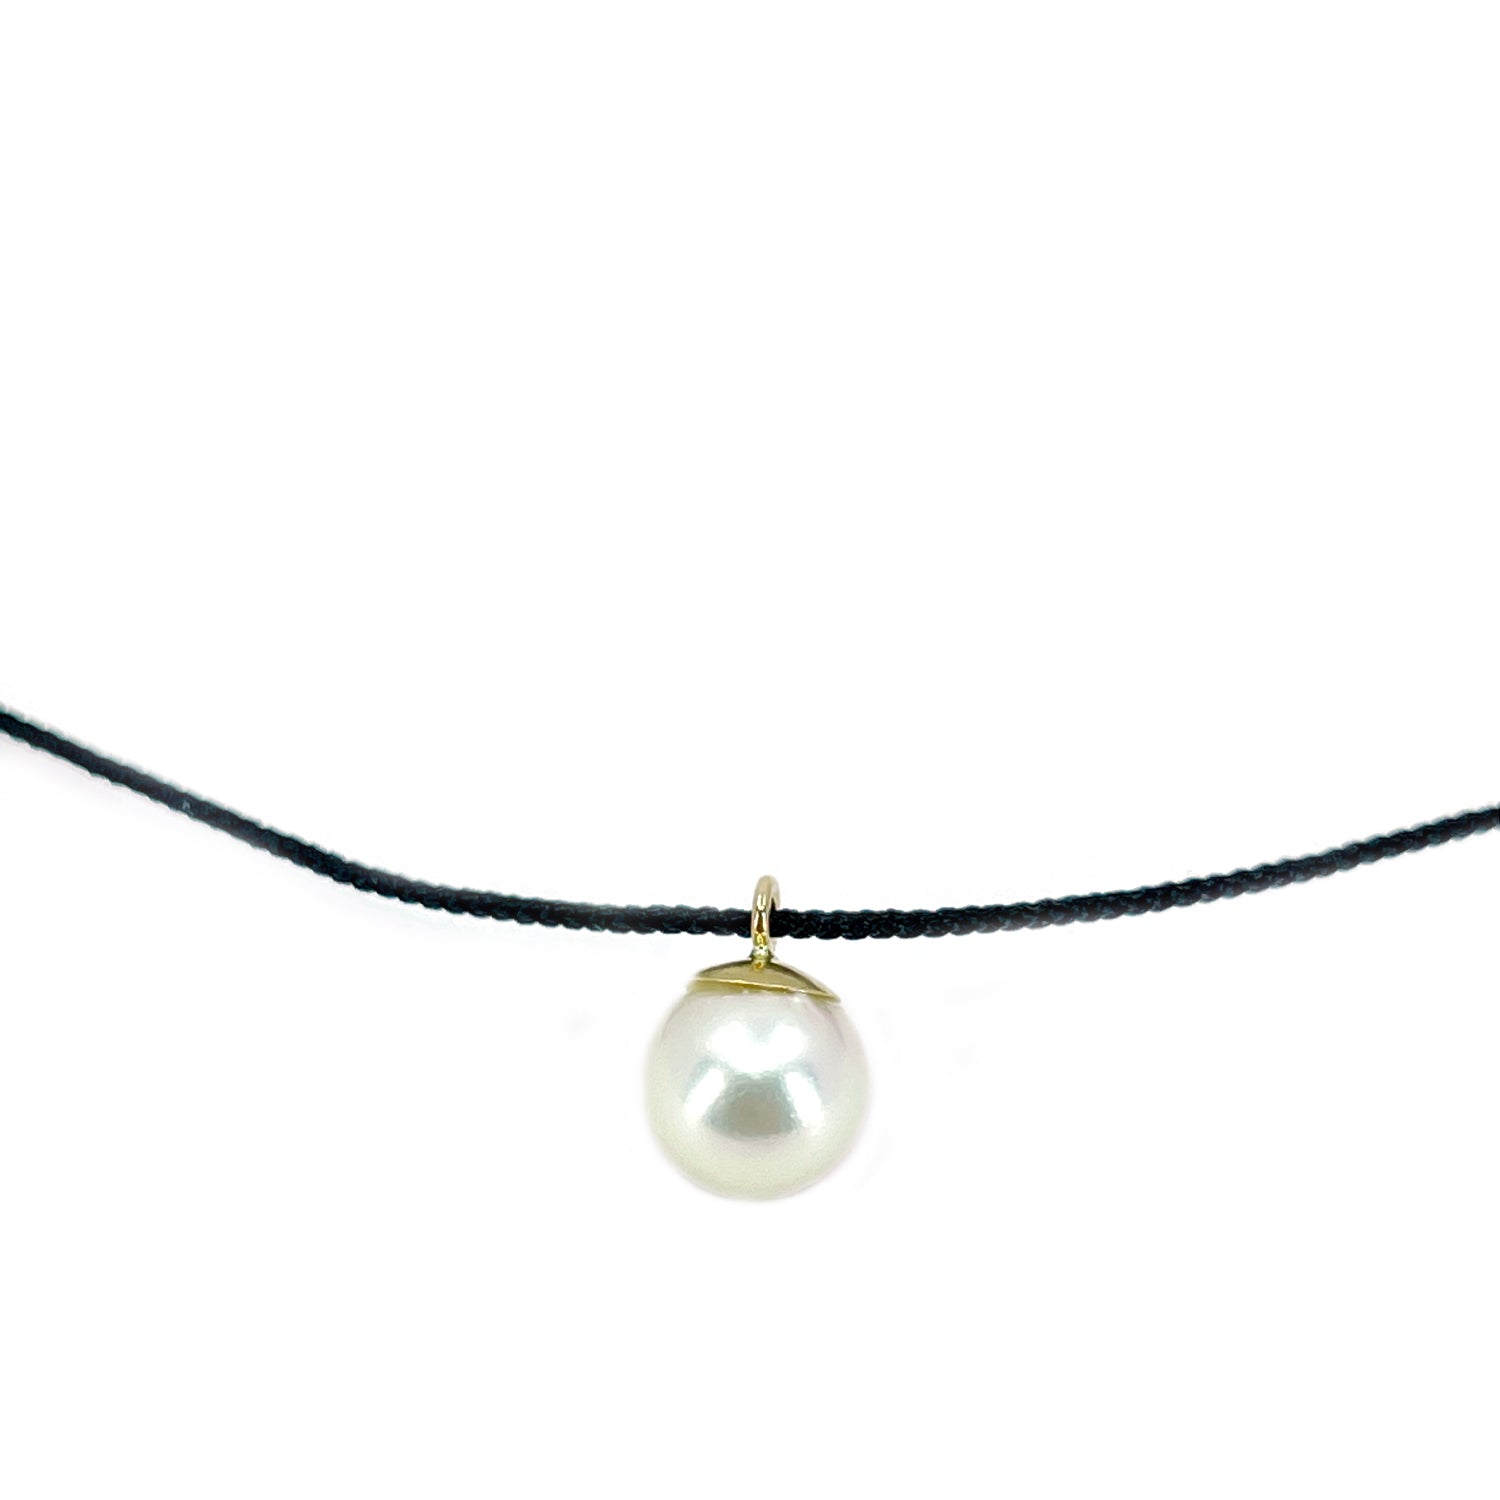 Kumihimo Braided Pure Black Silk Vintage Akoya Saltwater Cultured Pearl Adjustable Necklace-14K Yellow Gold